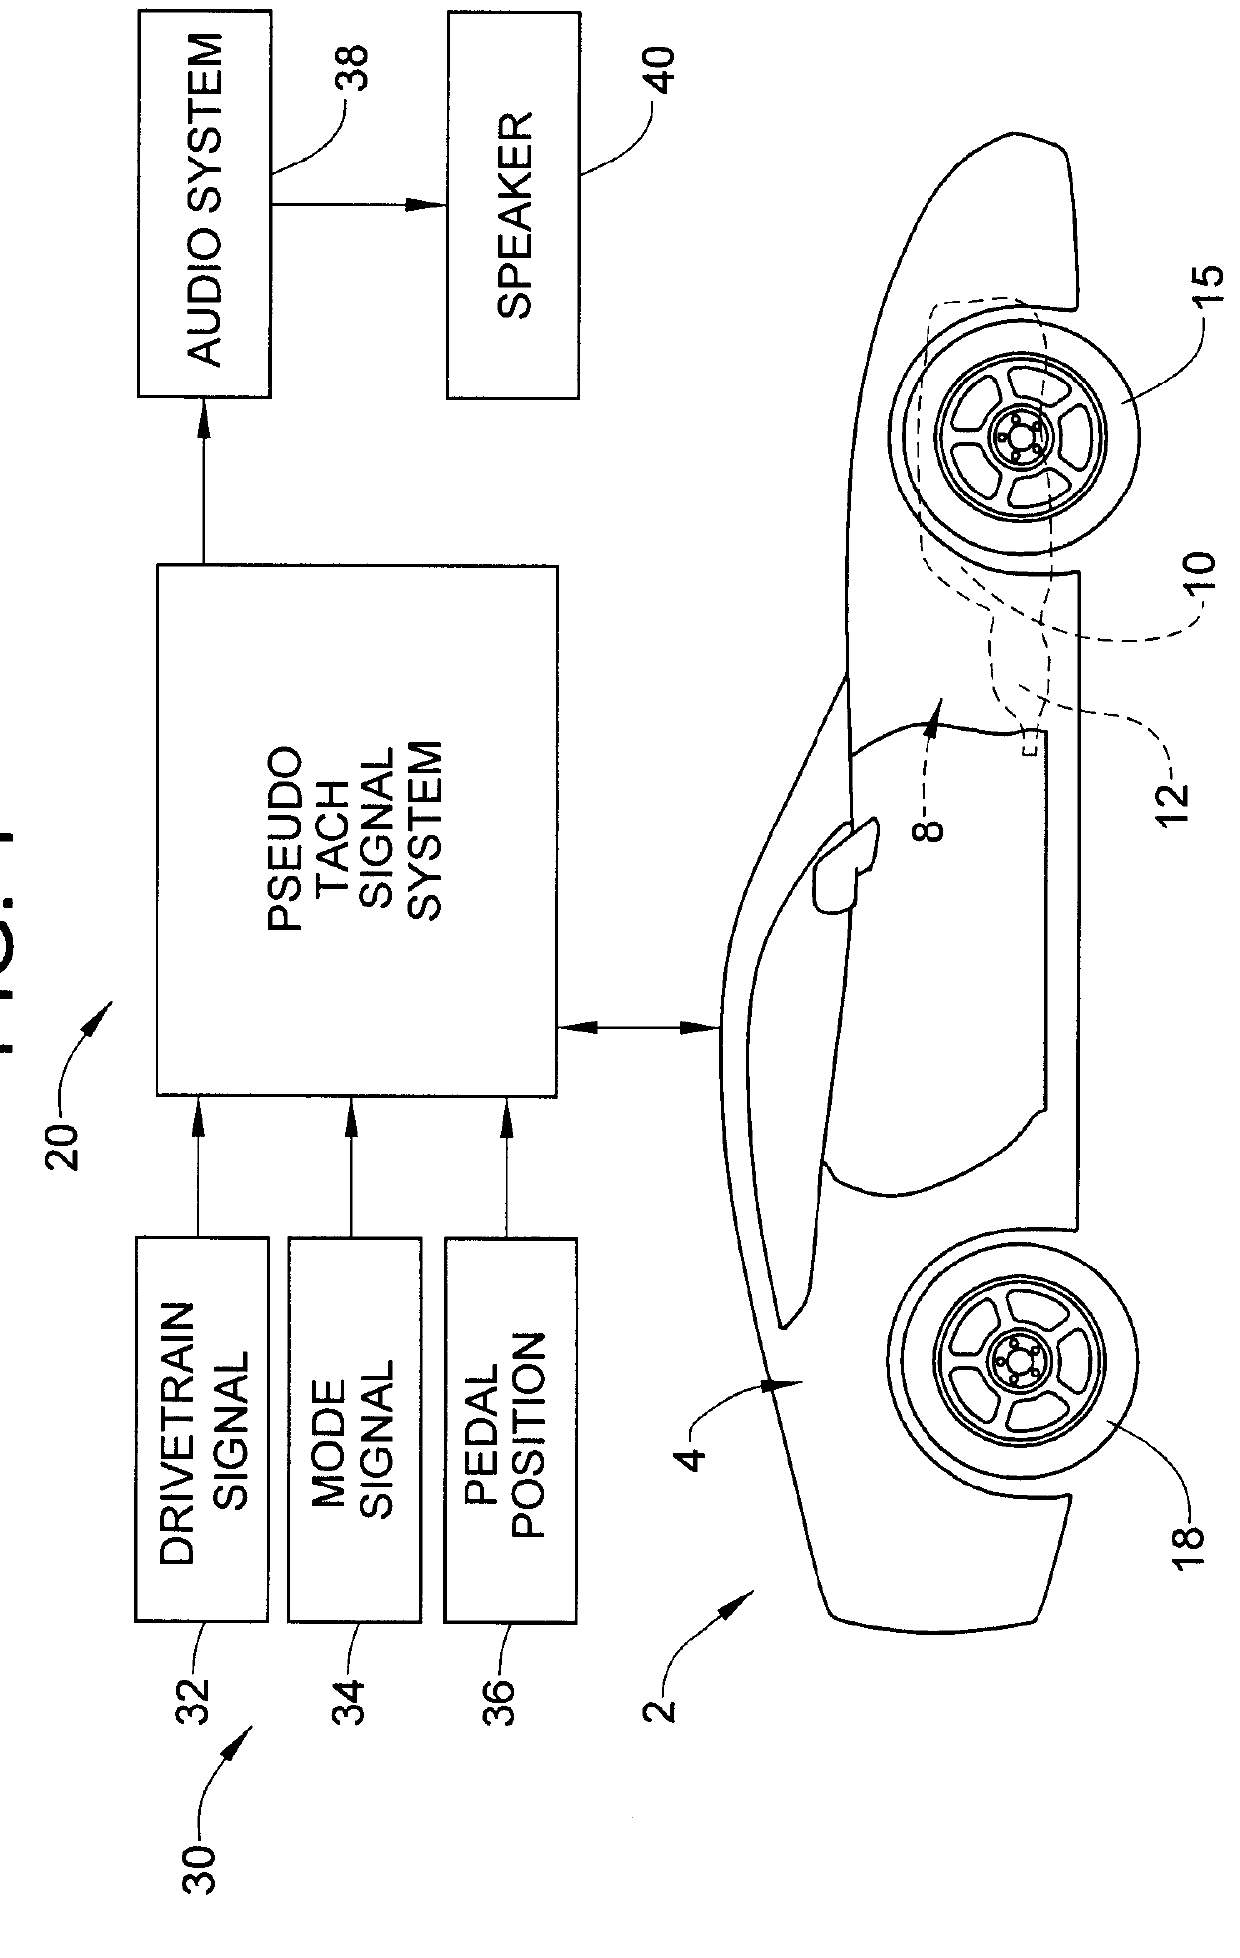 Pseudo-tach signal system for a motor vehicle